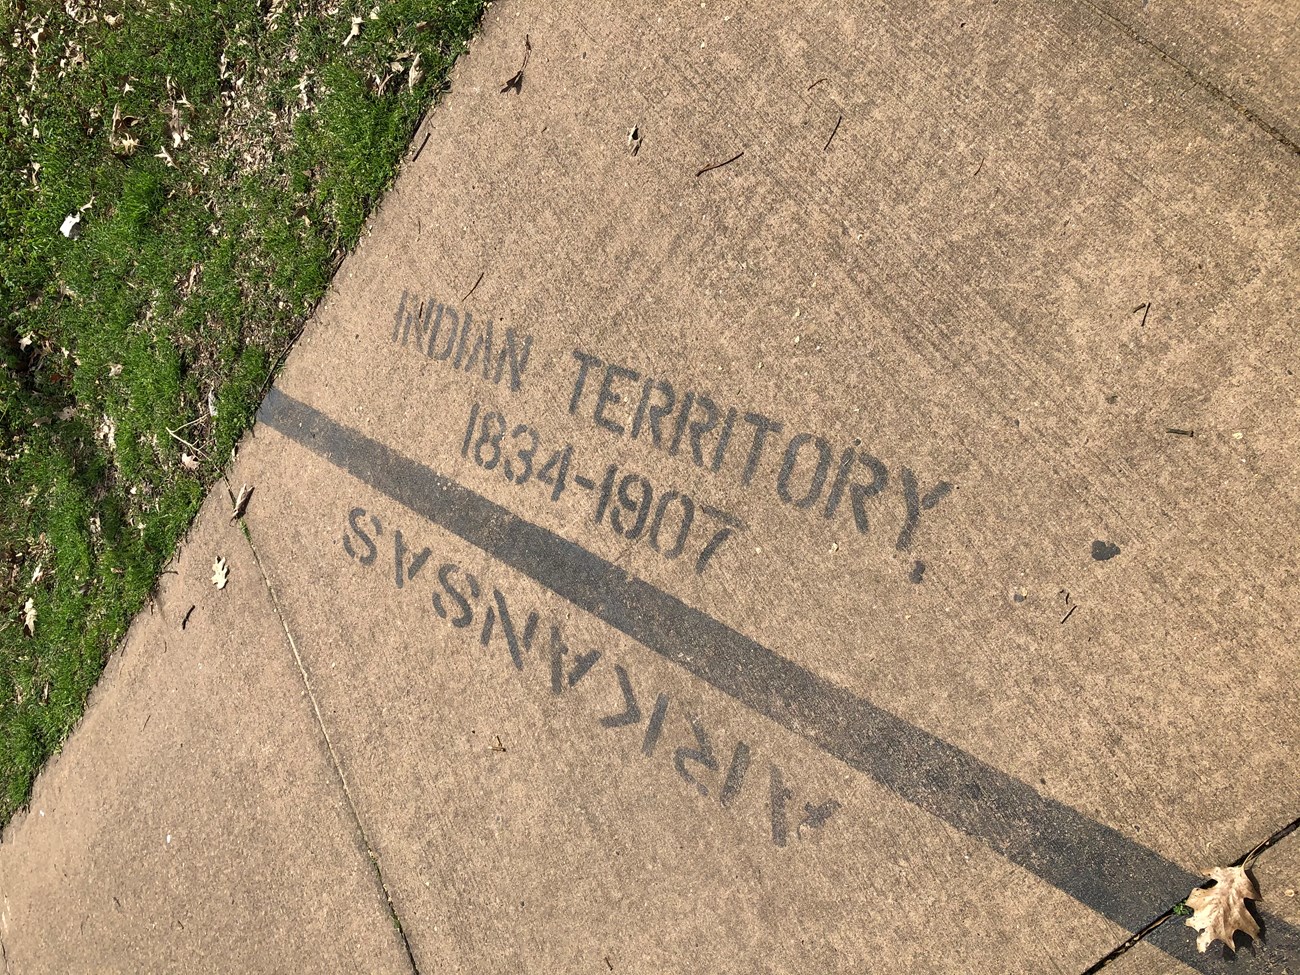 Black line painted across sidewalk with text on the right reading Indian Territory 1834-1907 and Arkansas on the left side of the line.